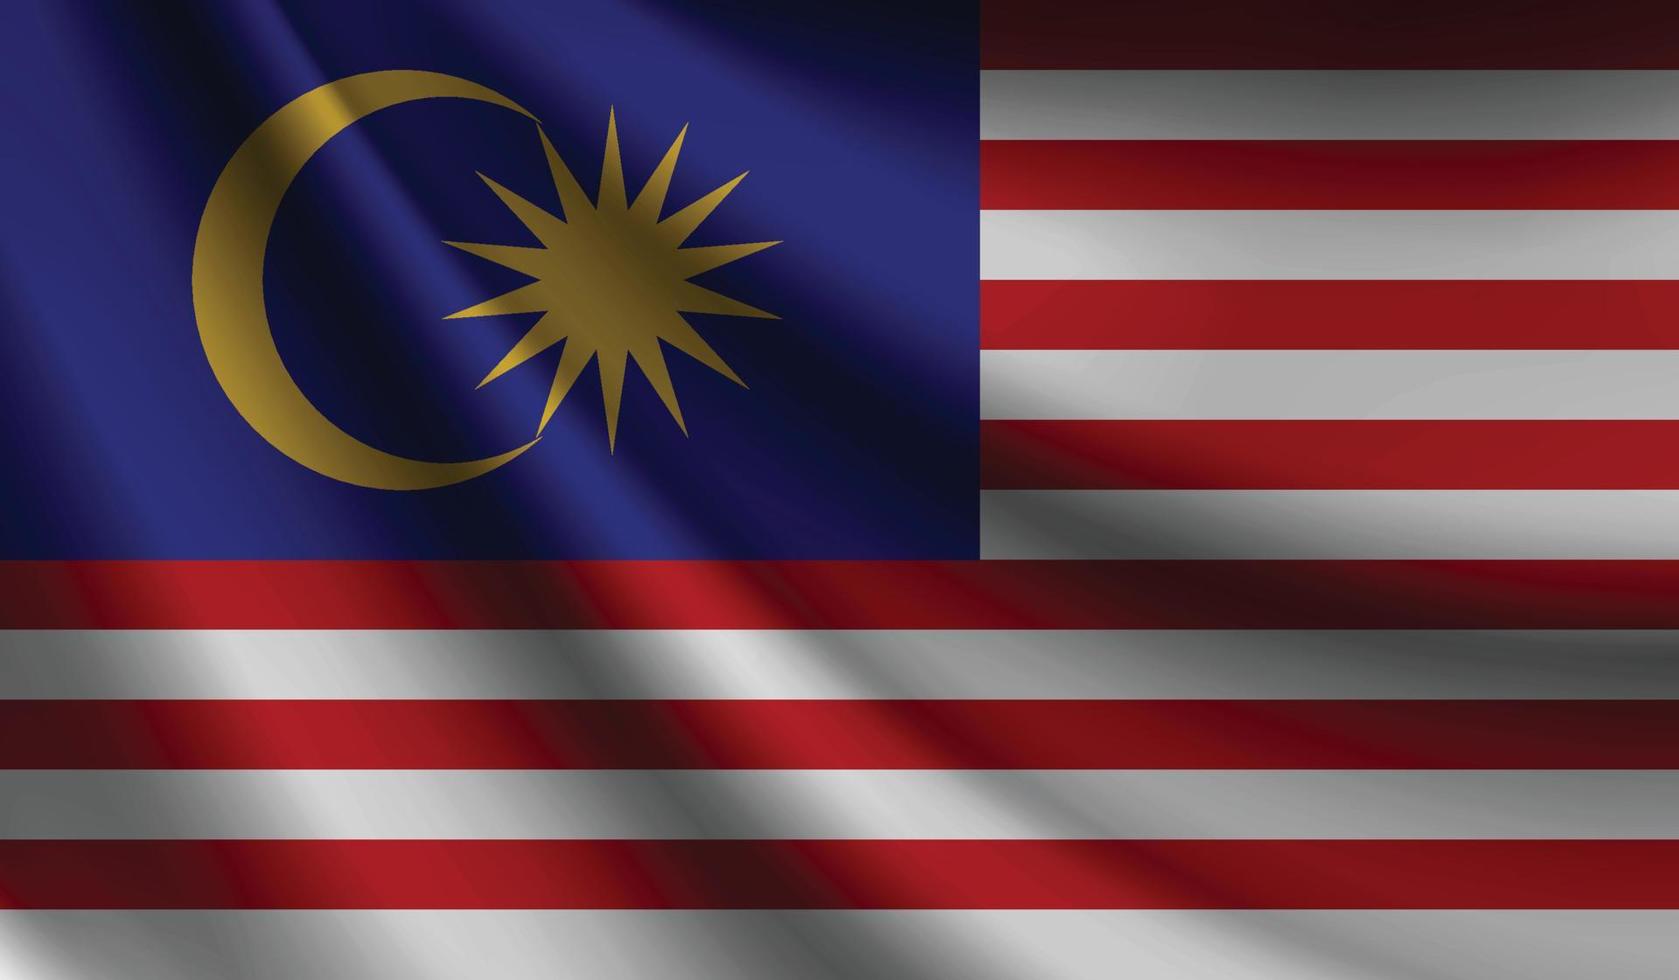 Malaysia flag waving. Background for patriotic and national design vector